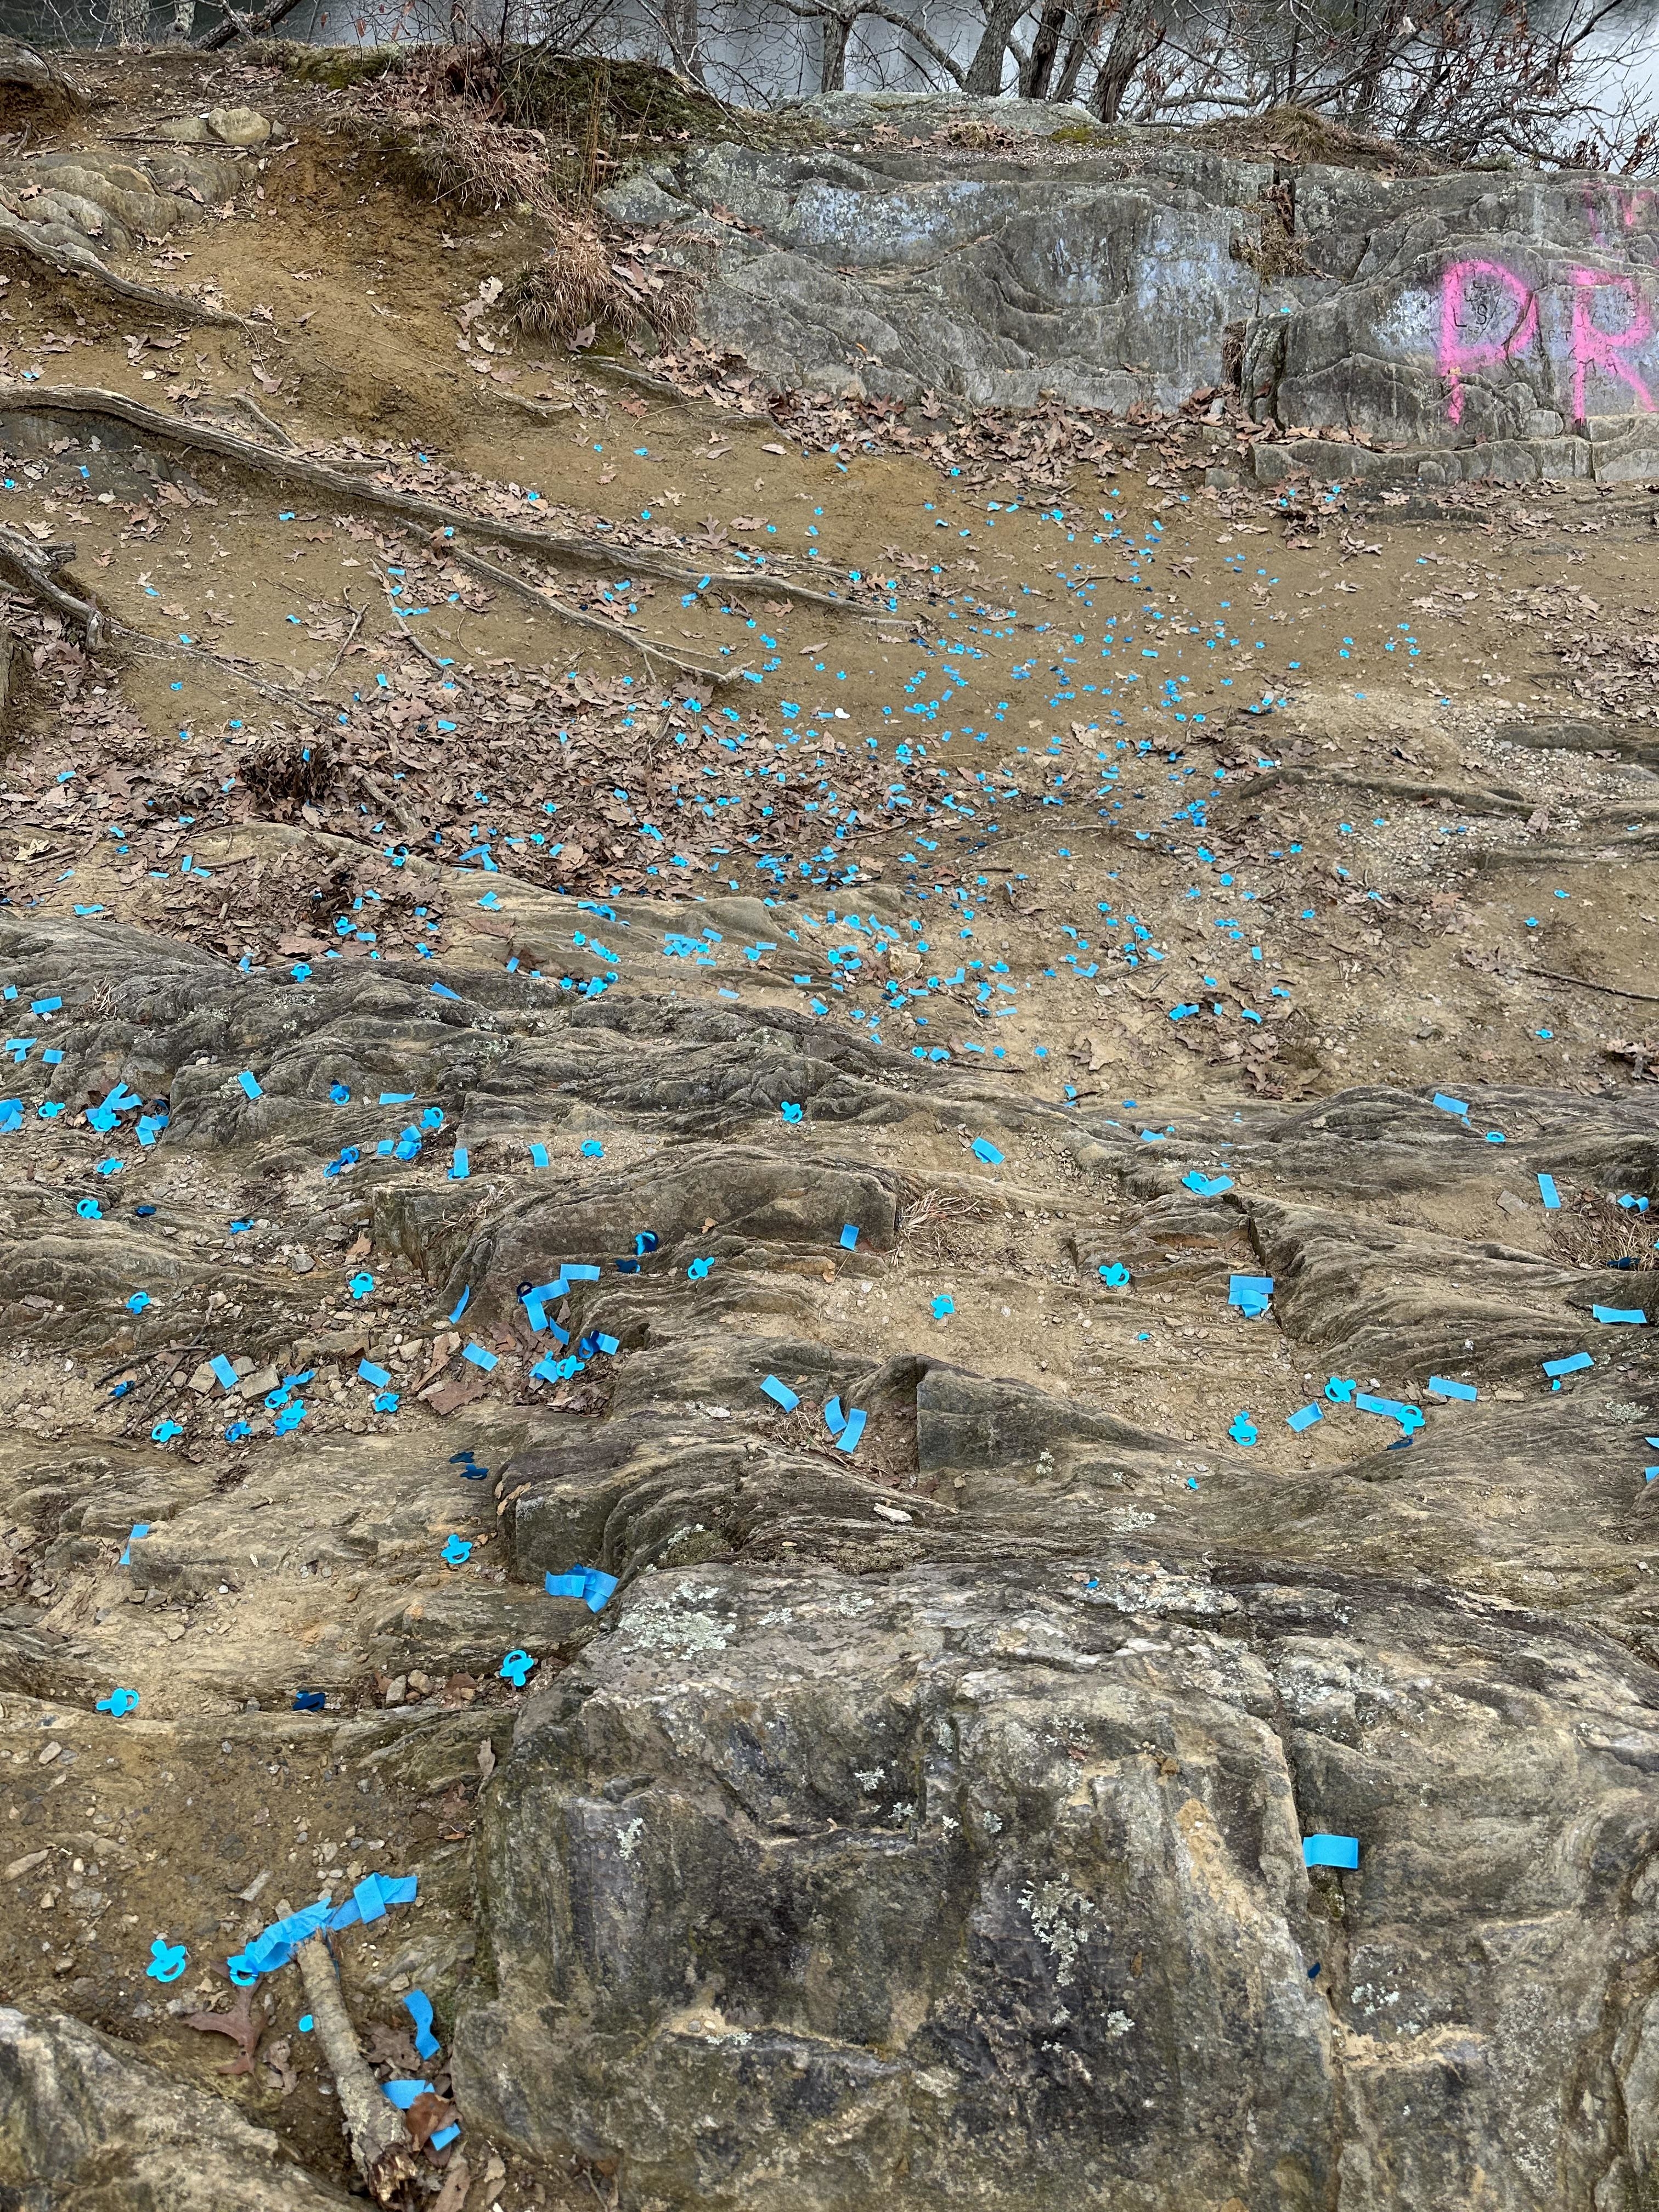 Scattered pieces of blue confetti on a rocky ground with sparse vegetation and graffiti in the background